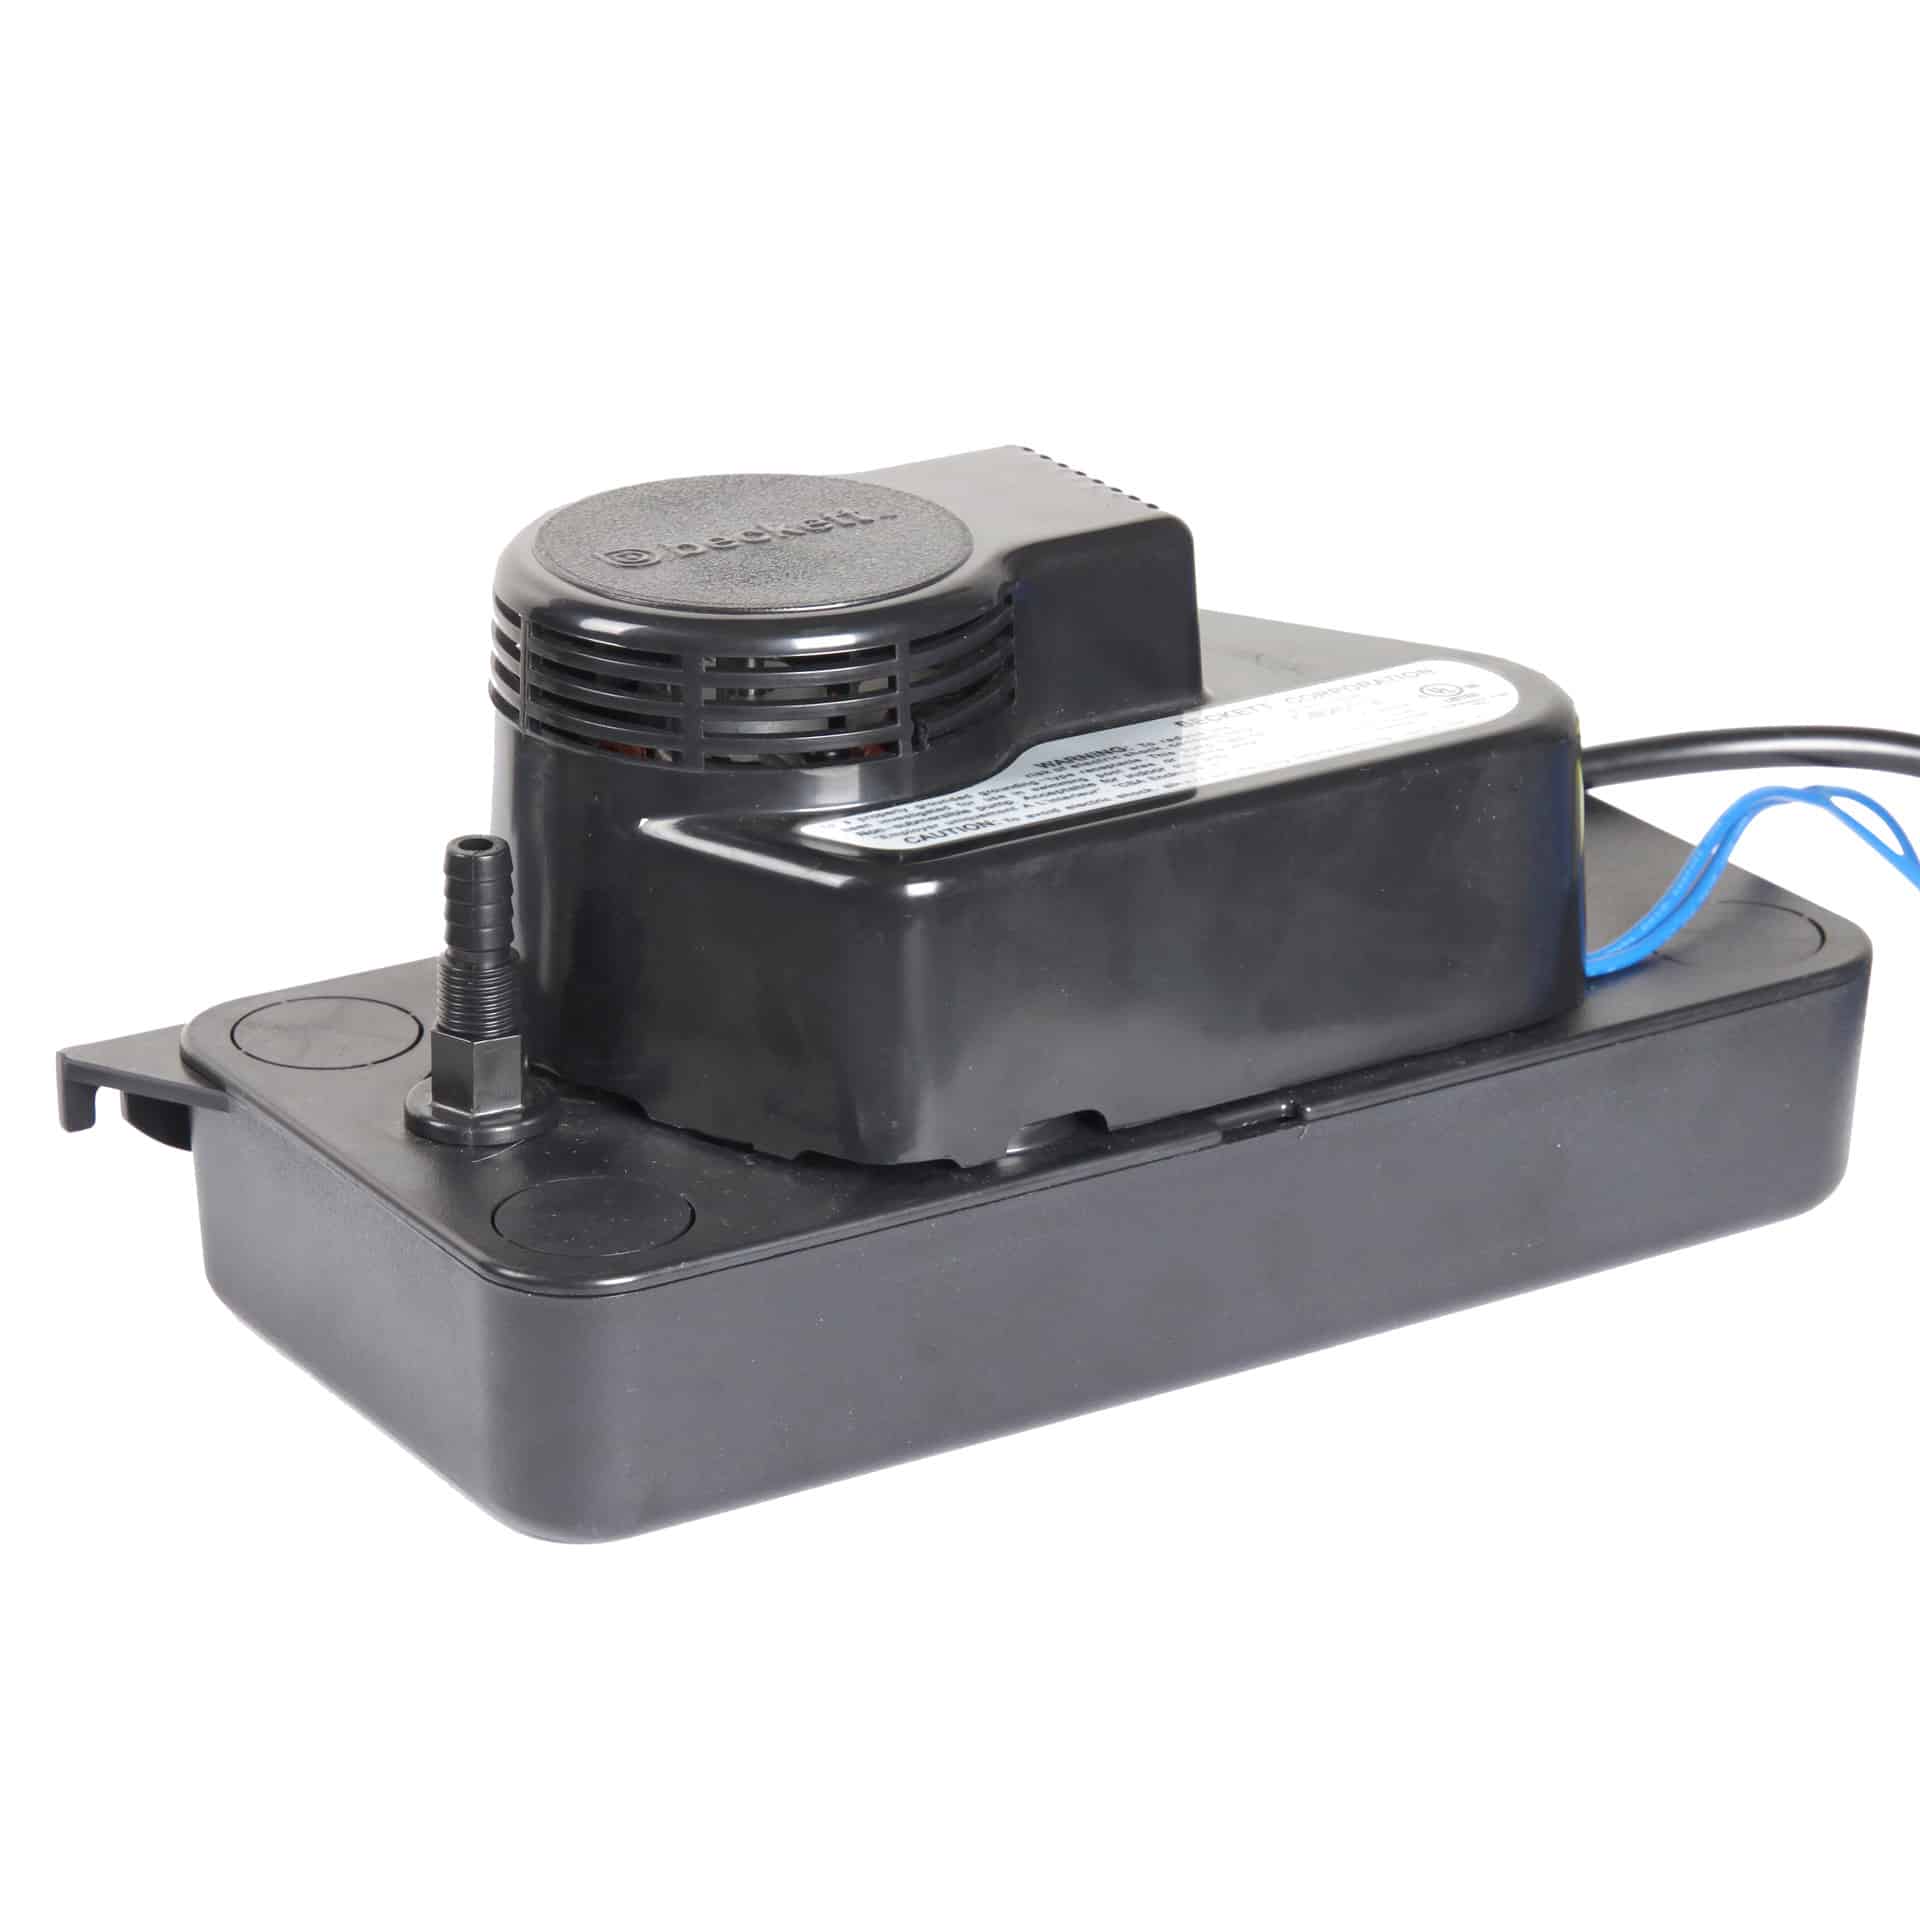 CL202UL – Low Profile Condensate Removal Pump, 230V, 20 Ft Max Lift